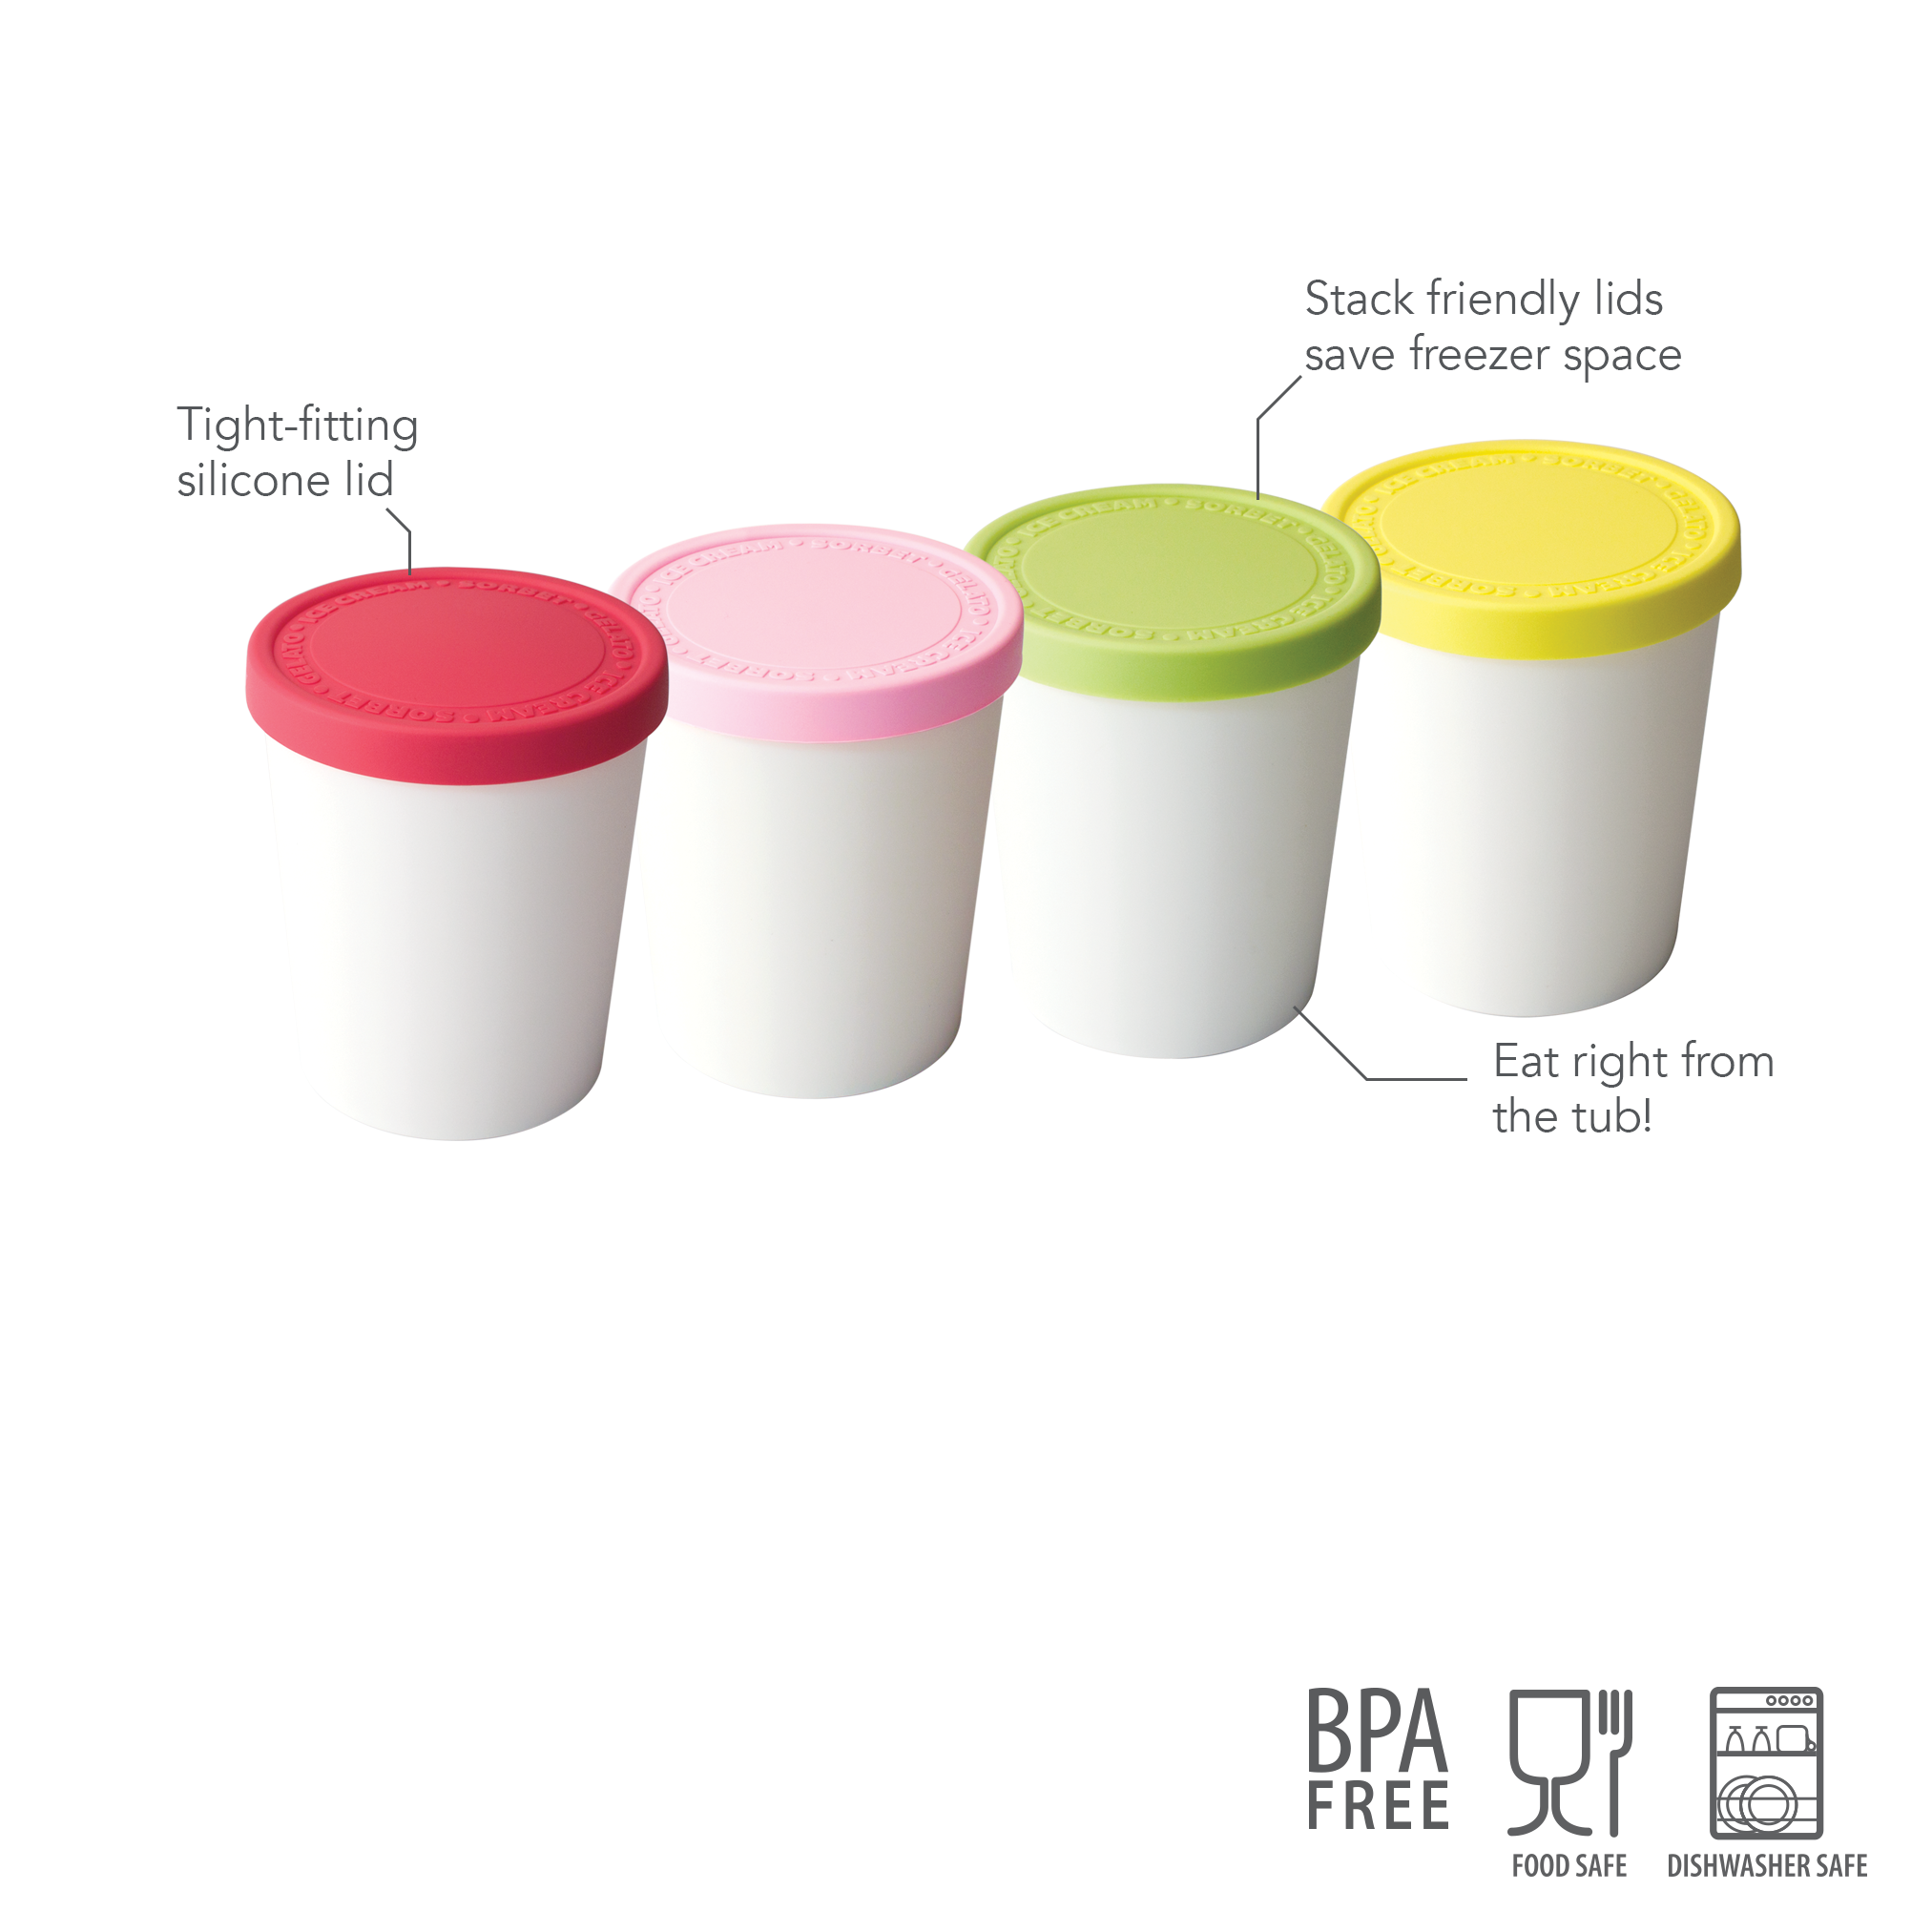 Tovolo Mini Sweet Treats Ice Cream Tubs, Reusable Container Stackable on Freezer Shelves, BPA-Free, Set of 4, Assorted Colors - image 3 of 5